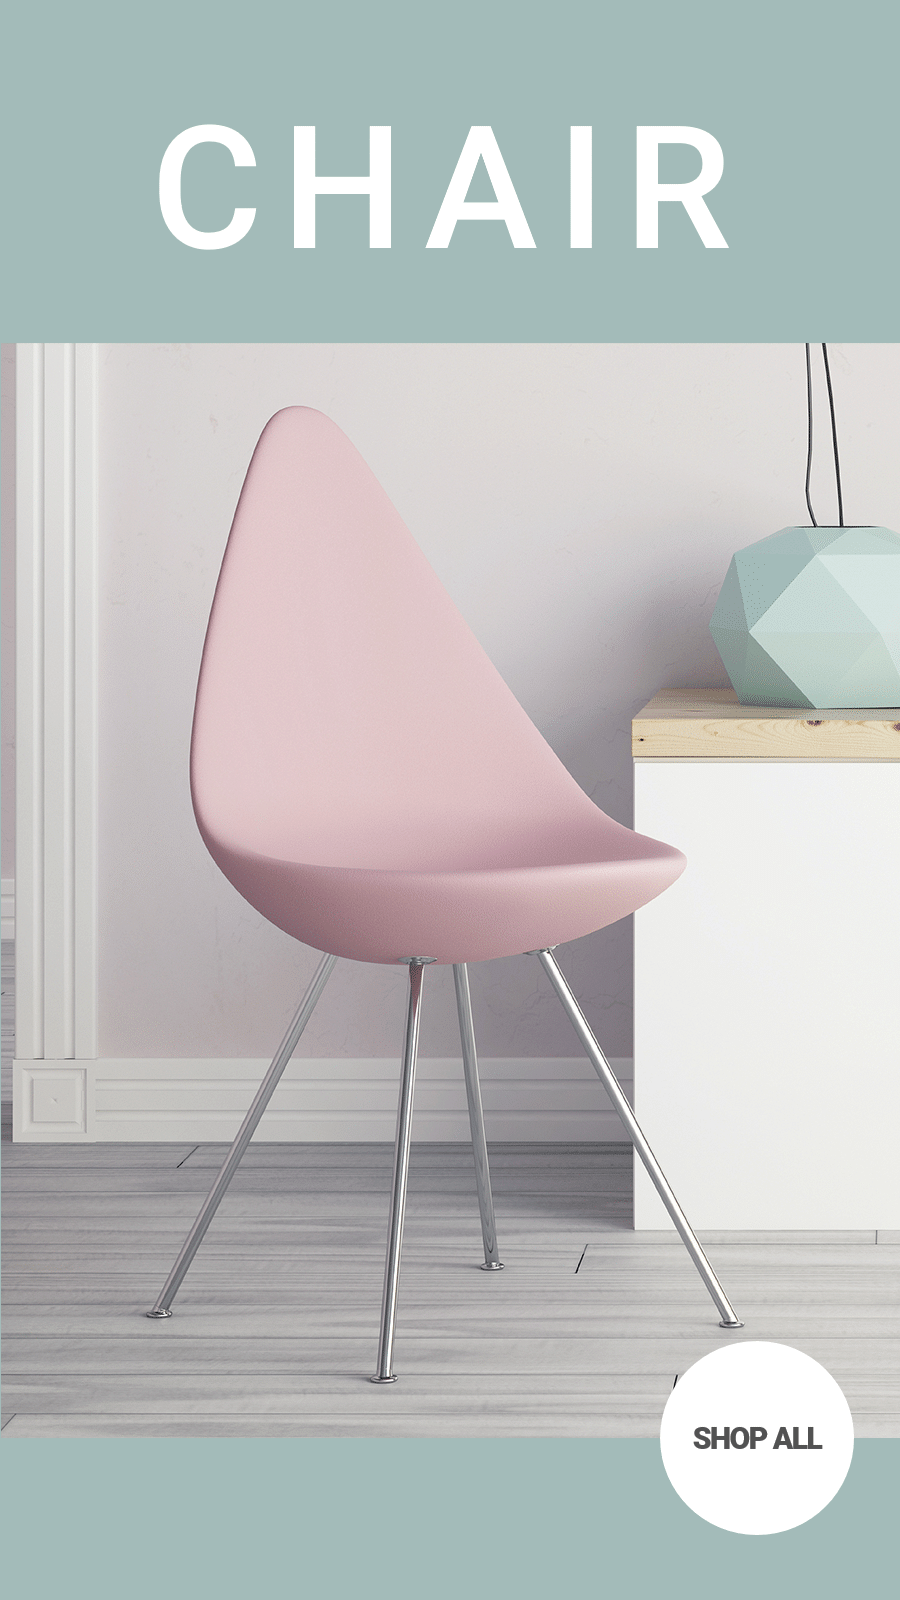 Furniture Promotion Pink Chair Picture Simple Fashion Cool Style Instagram Highlight